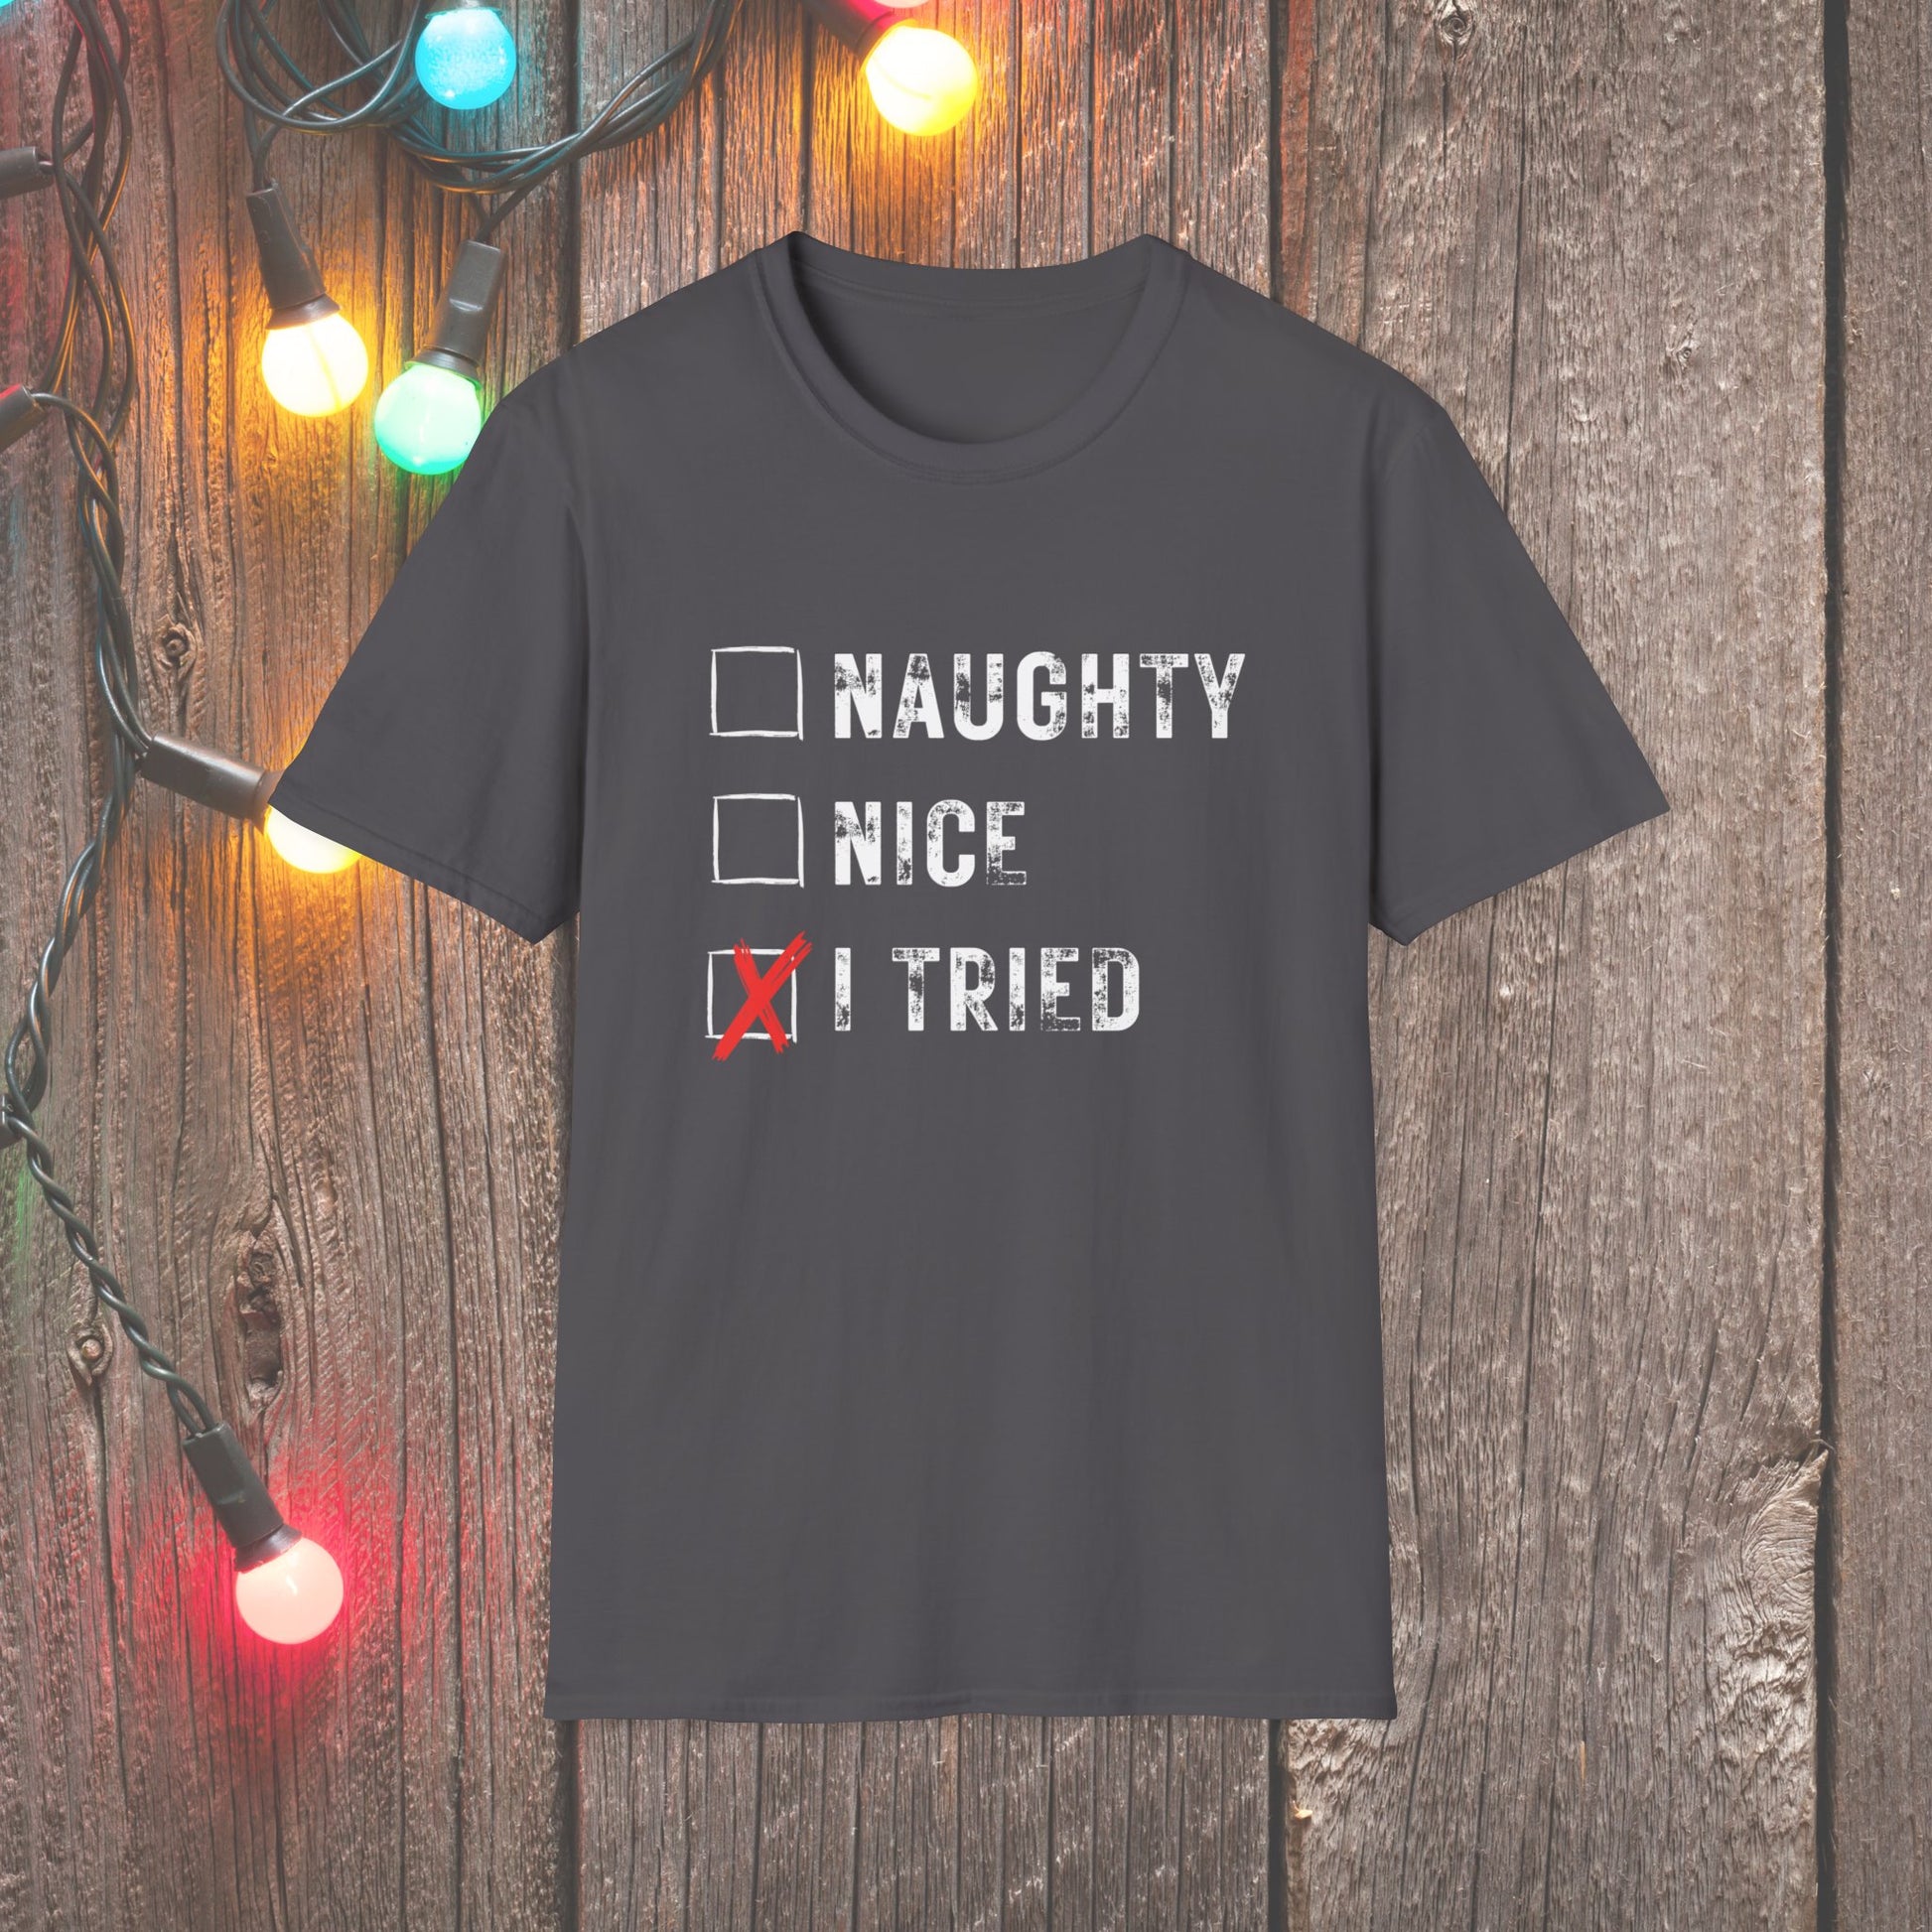 Christmas T-Shirt - Naughty Nice I Tried - Mens Christmas Shirts - Youth and Adult Christmas TShirts T-Shirts Graphic Avenue Charcoal Adult Small 